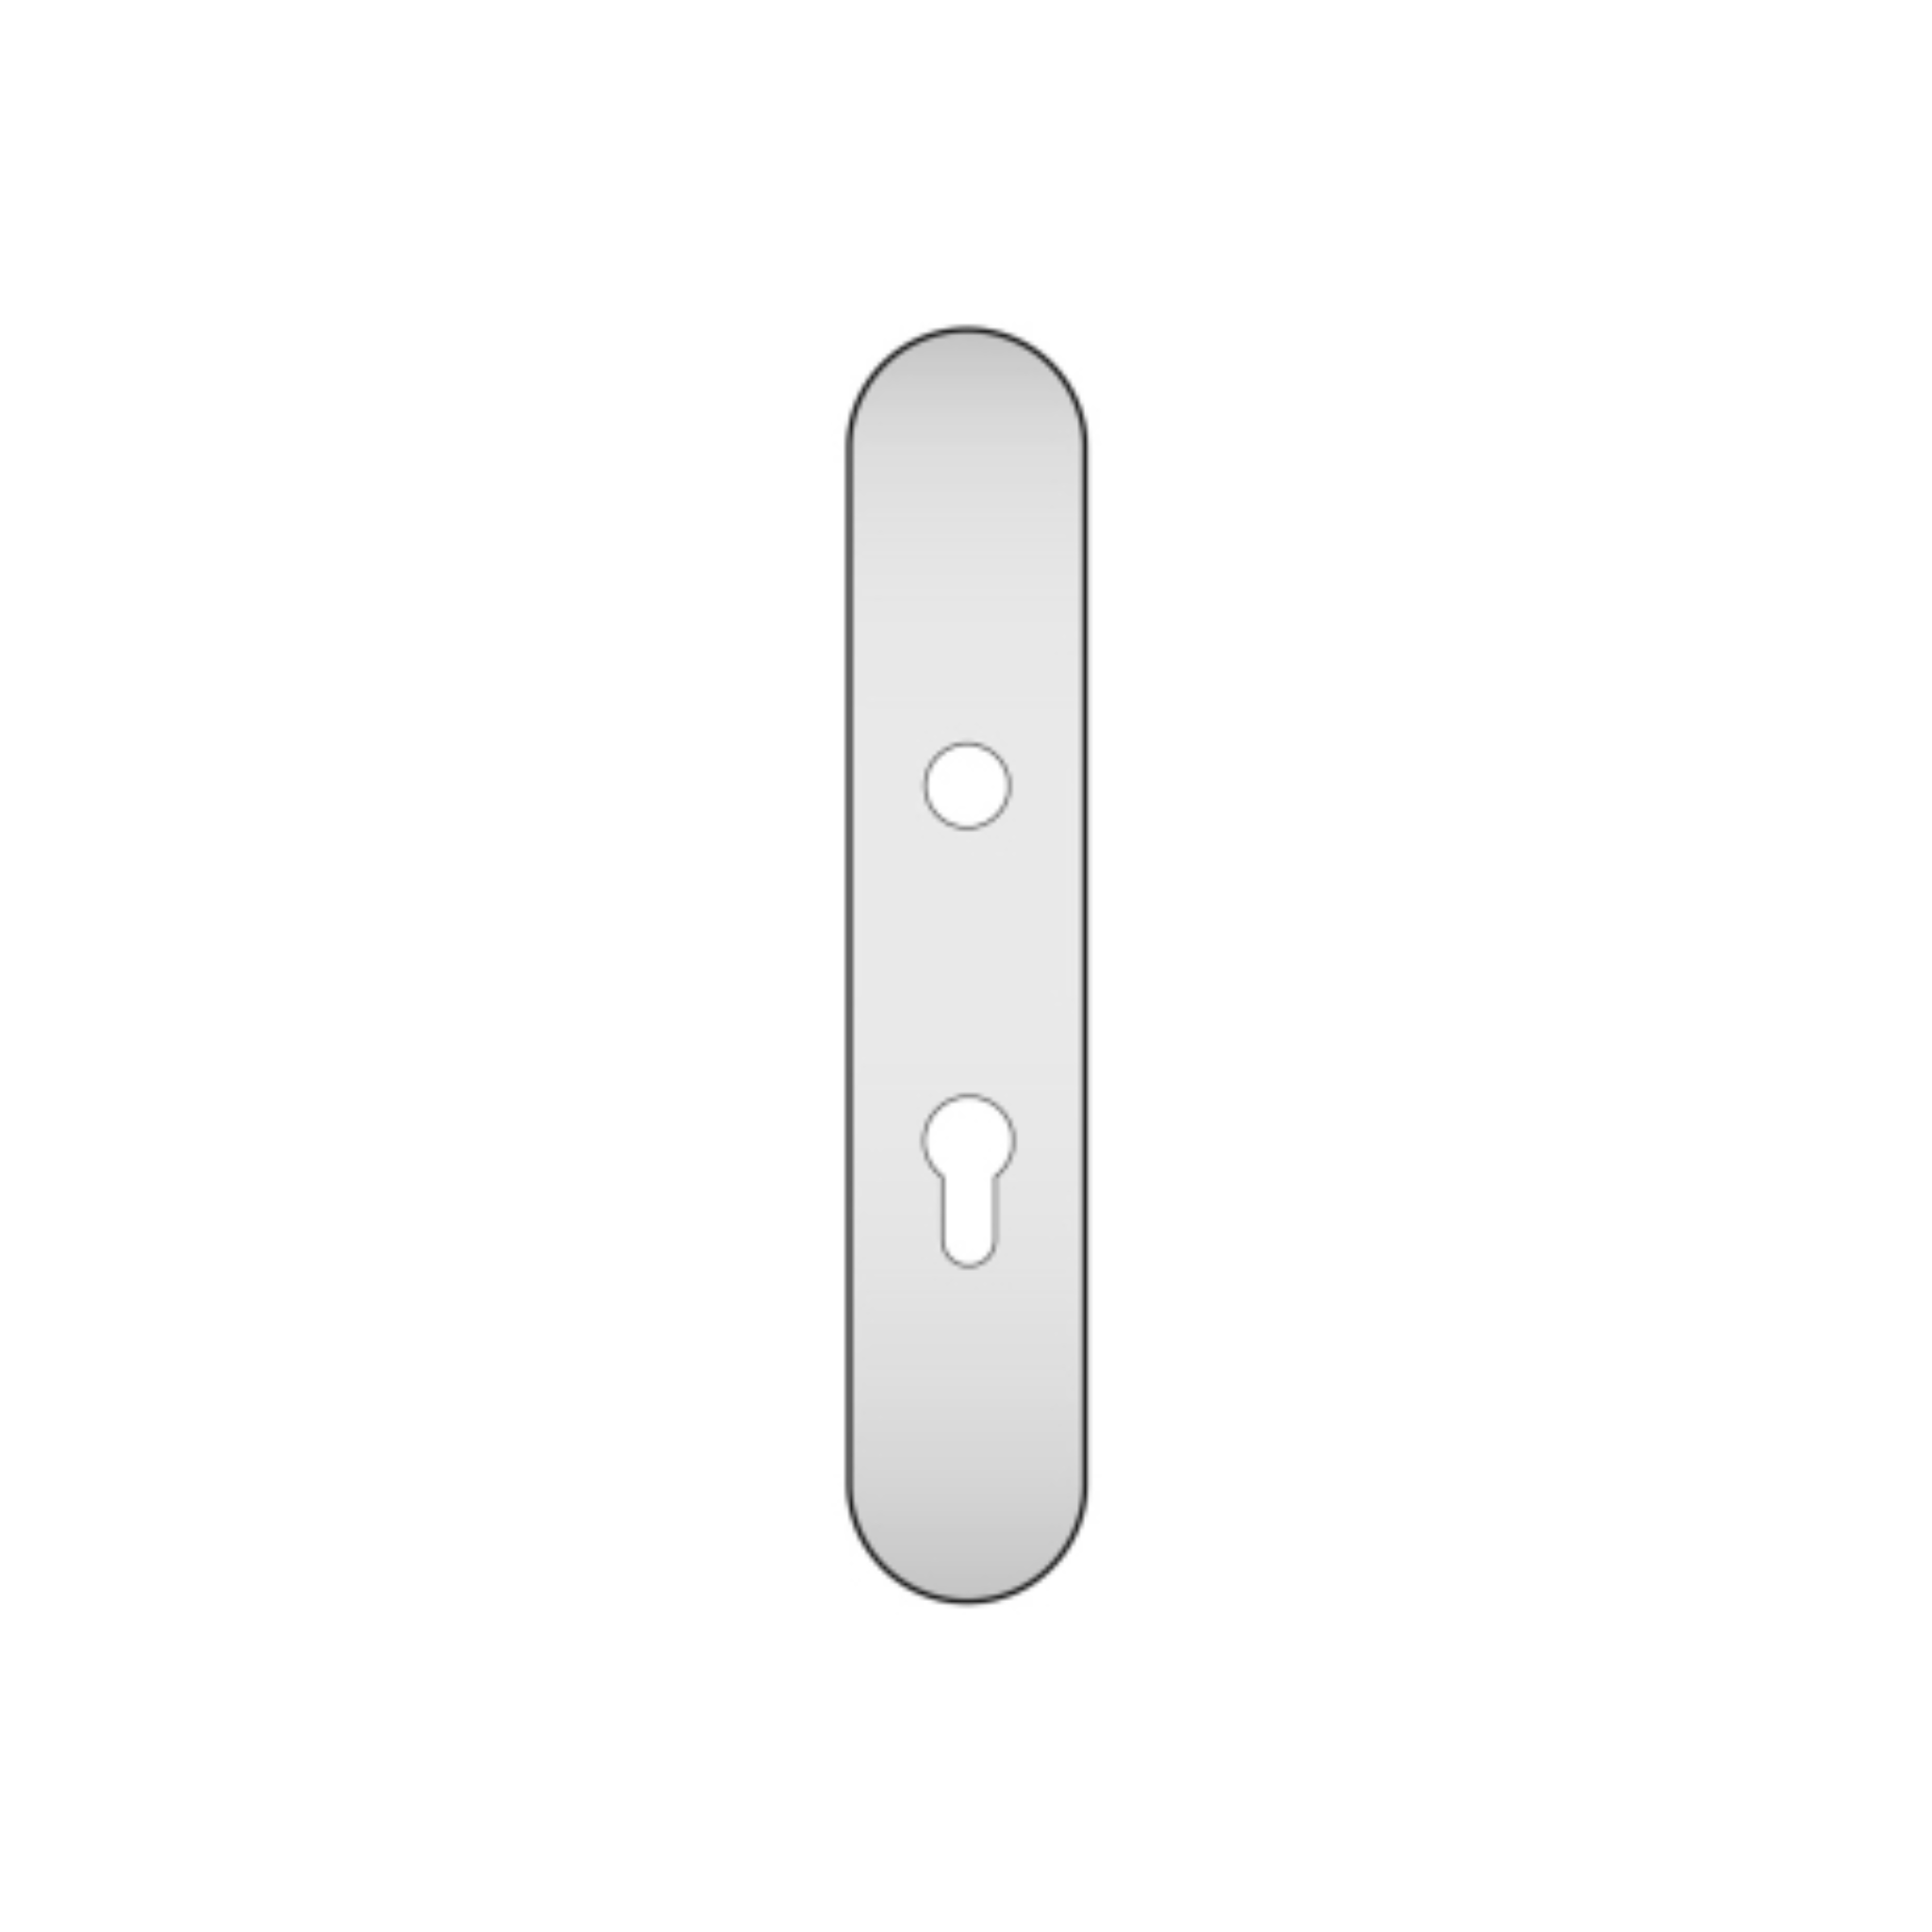 QS4484 CYL, Plate, Oval, 245mm (l) x 45mm (w), Supplied with QS Handle, Stainless Steel, QS